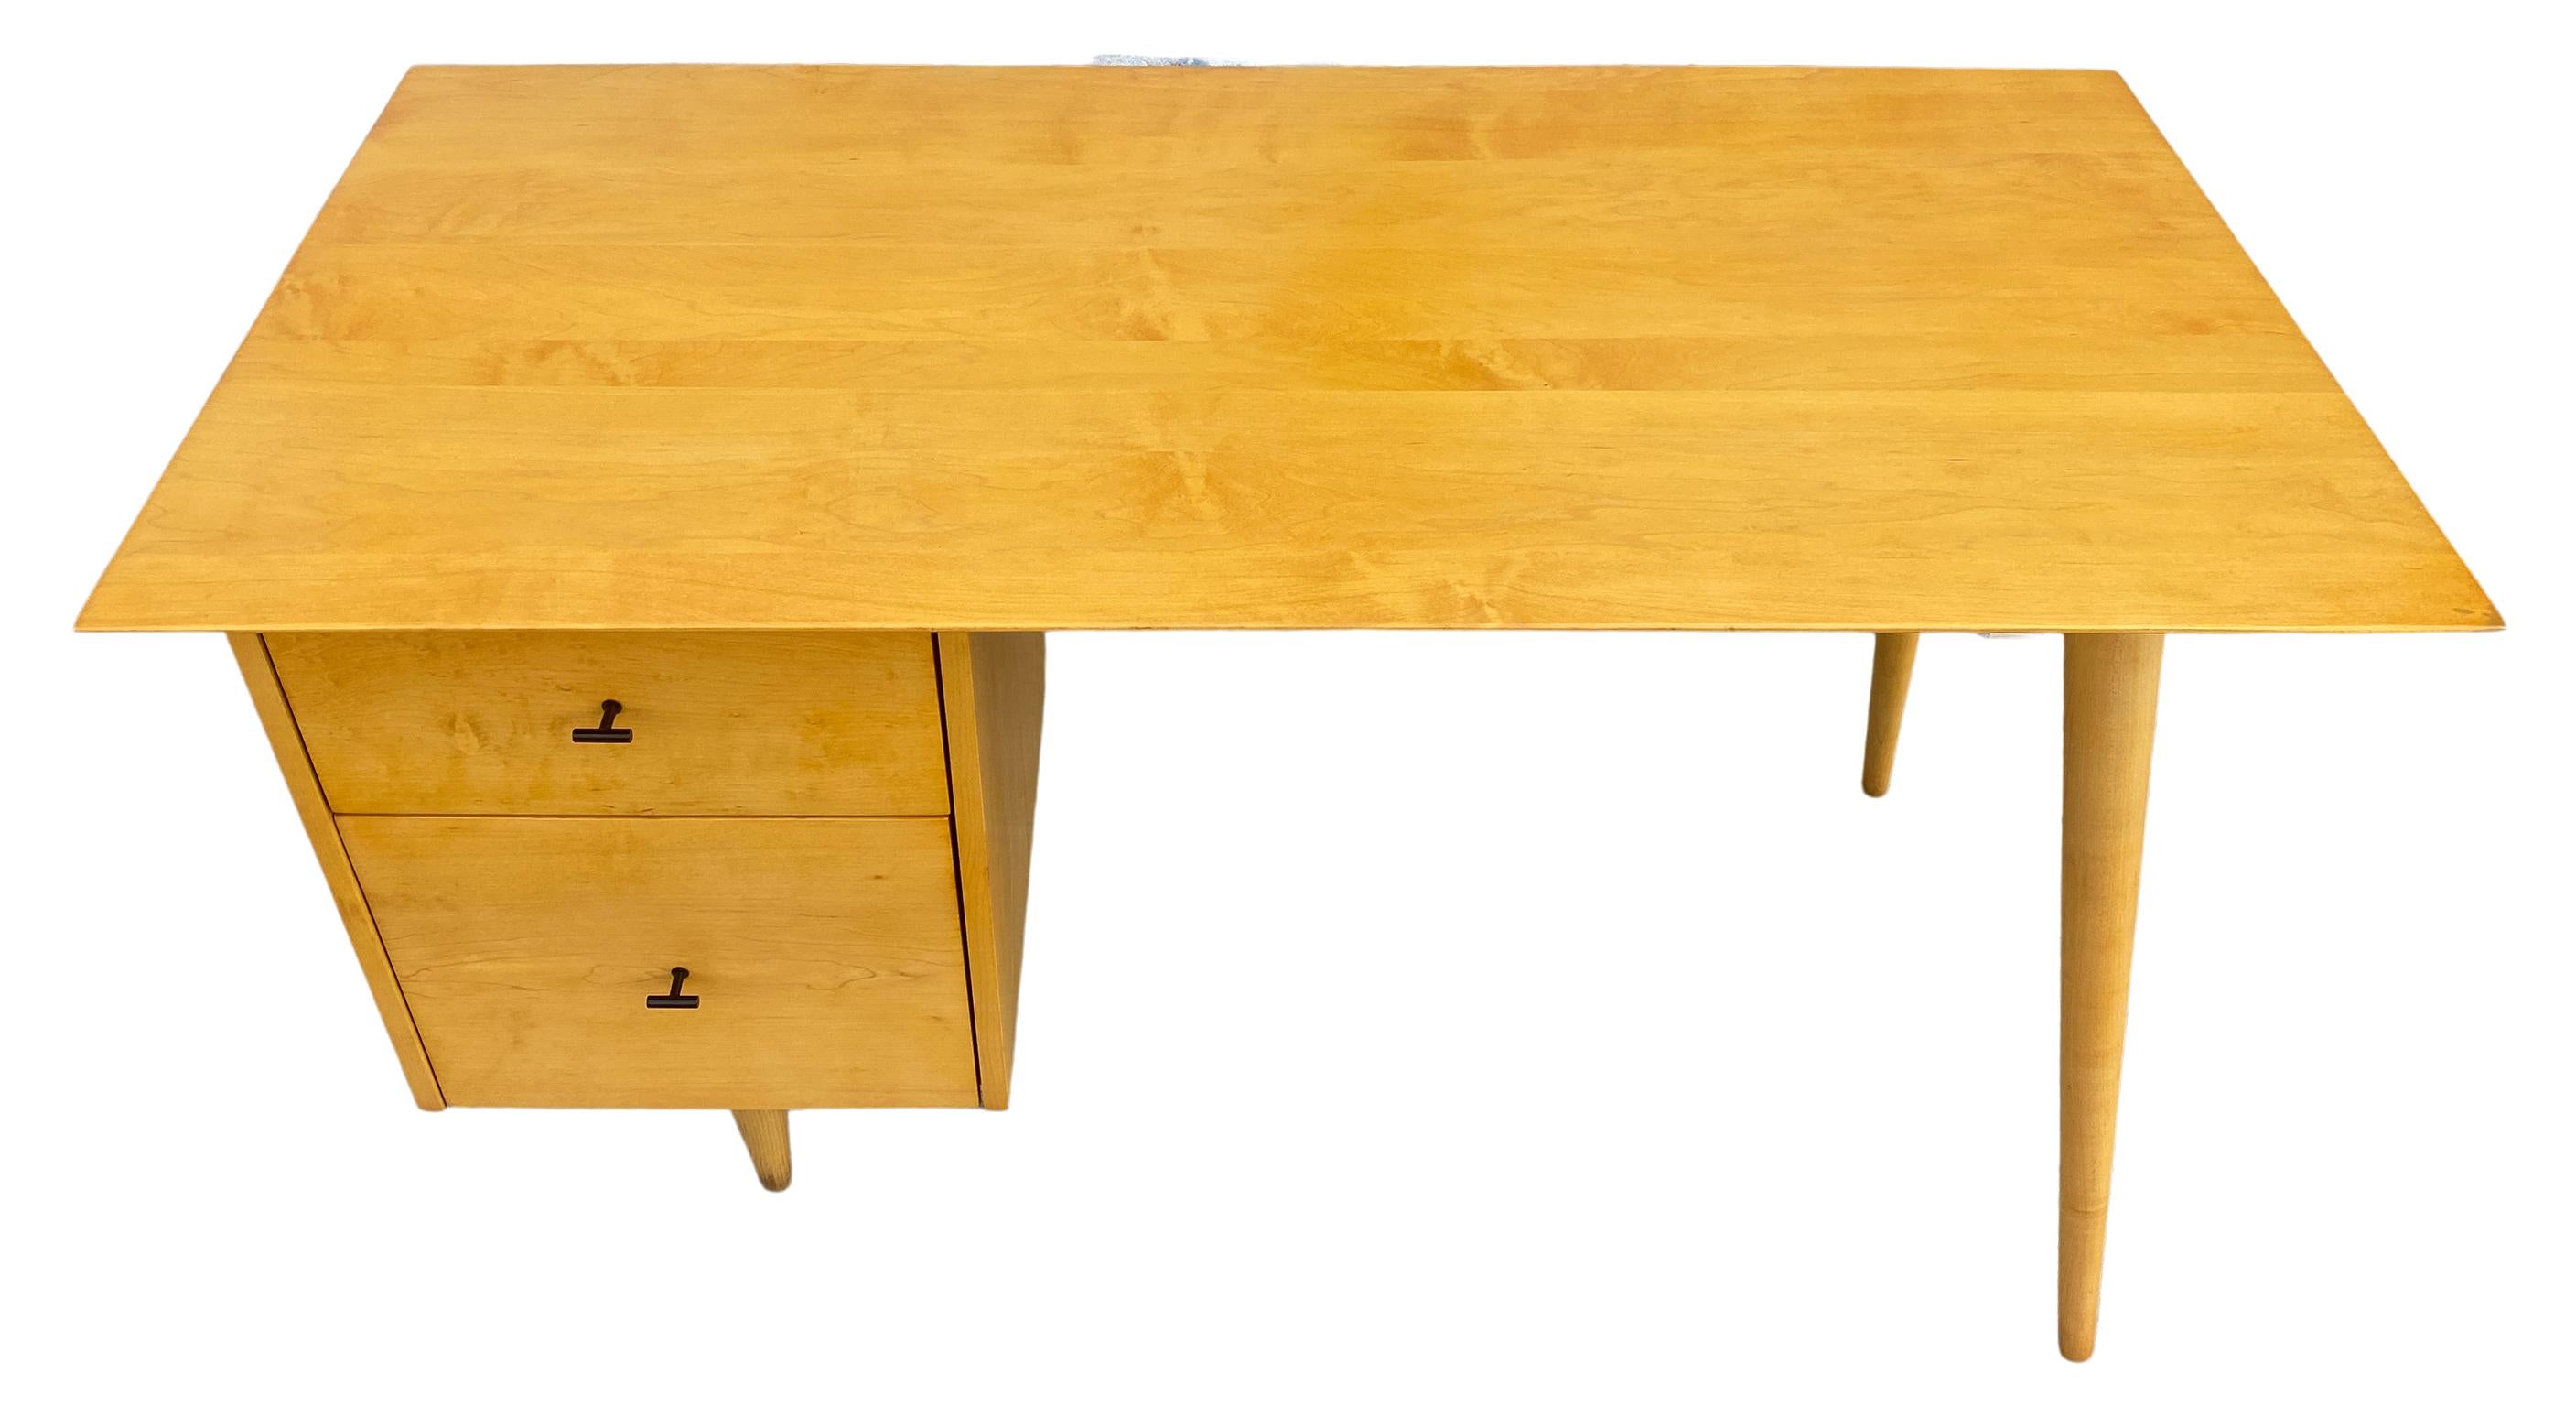 Beautiful Paul McCobb Planner Group #1560 double drawer desk blonde maple finish with steel T pull knobs solid maple. Desk has been professional refinished. Very beautiful designed desk on tapered legs, all solid maple. All legs unscrew. Designers